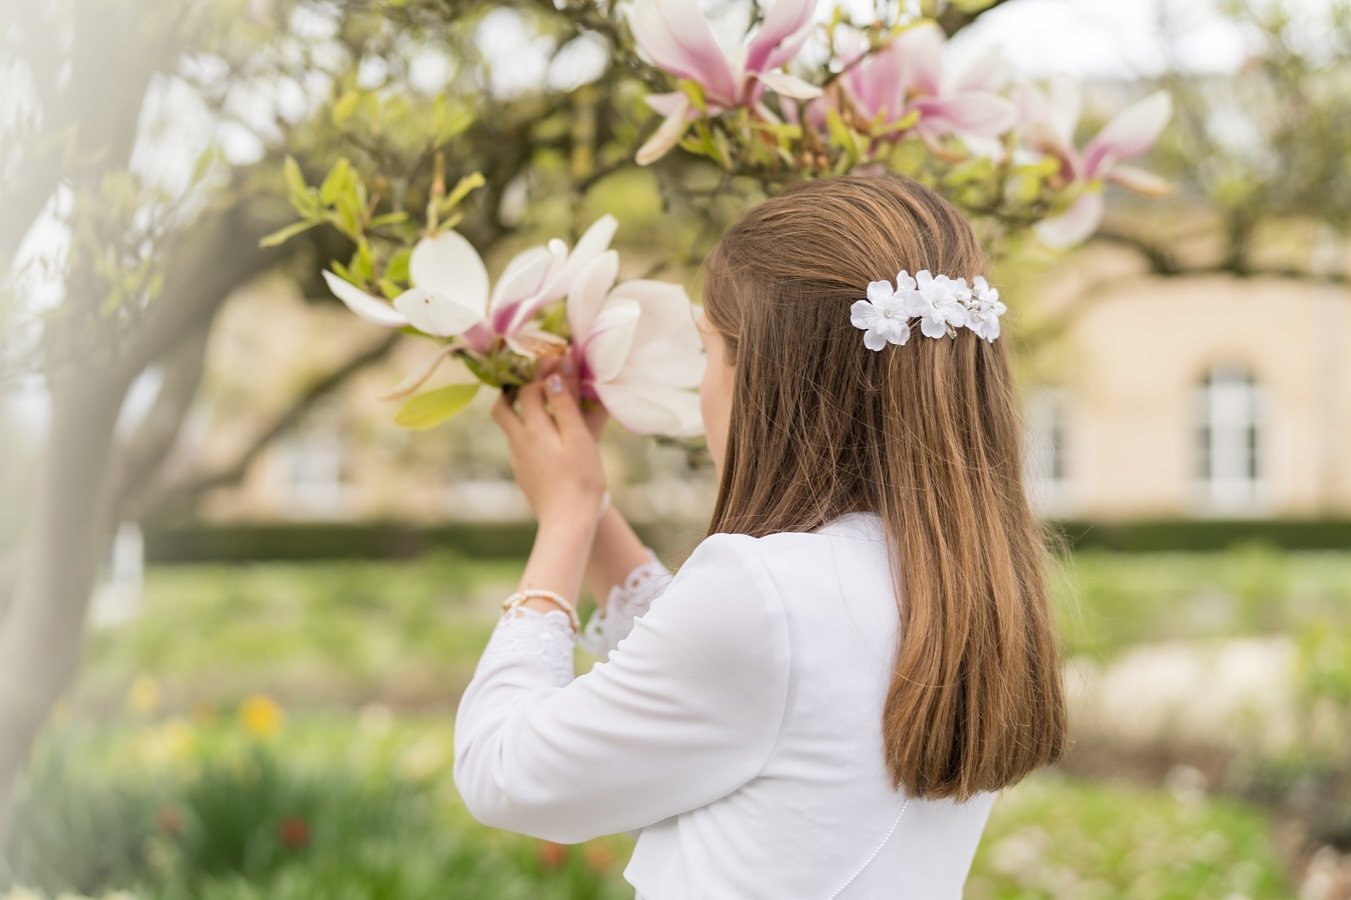 Now is the perfect time to book your outdoor sessions for Communions, finally the sun is starting to visit us and there are still some blooming trees to make the sessions even more special and ethereal.
#luxembourgfamilyphotographer #holycommunion #p